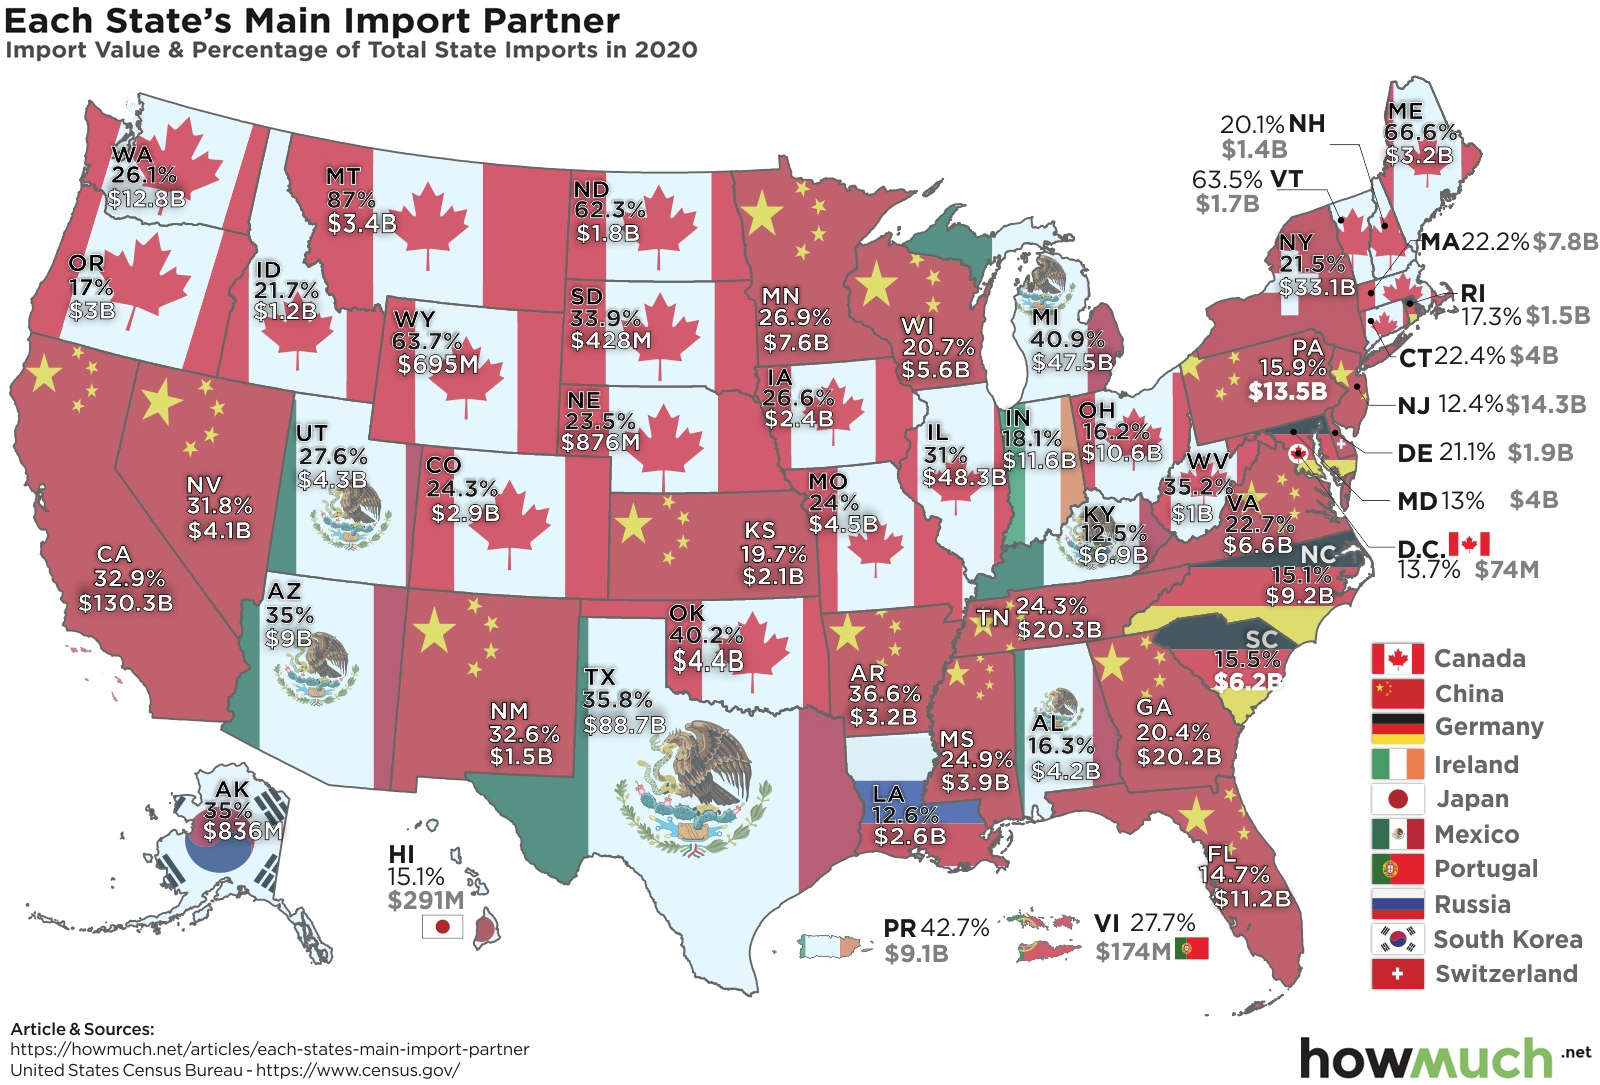 Trading Partner of Every U.S. State